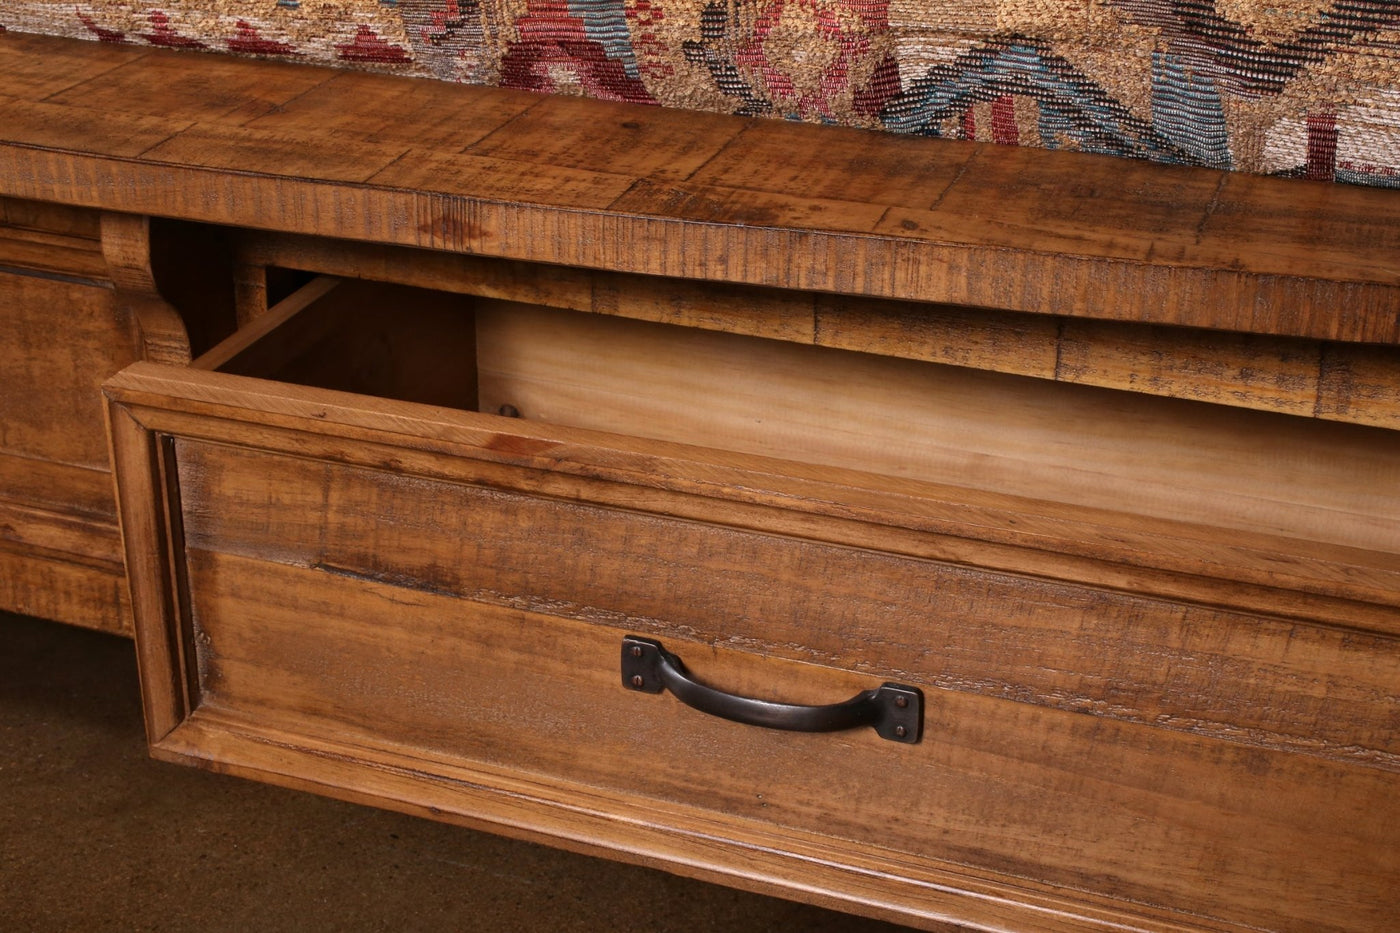 Sunset Trading Rustic City King Bed | Storage Drawers